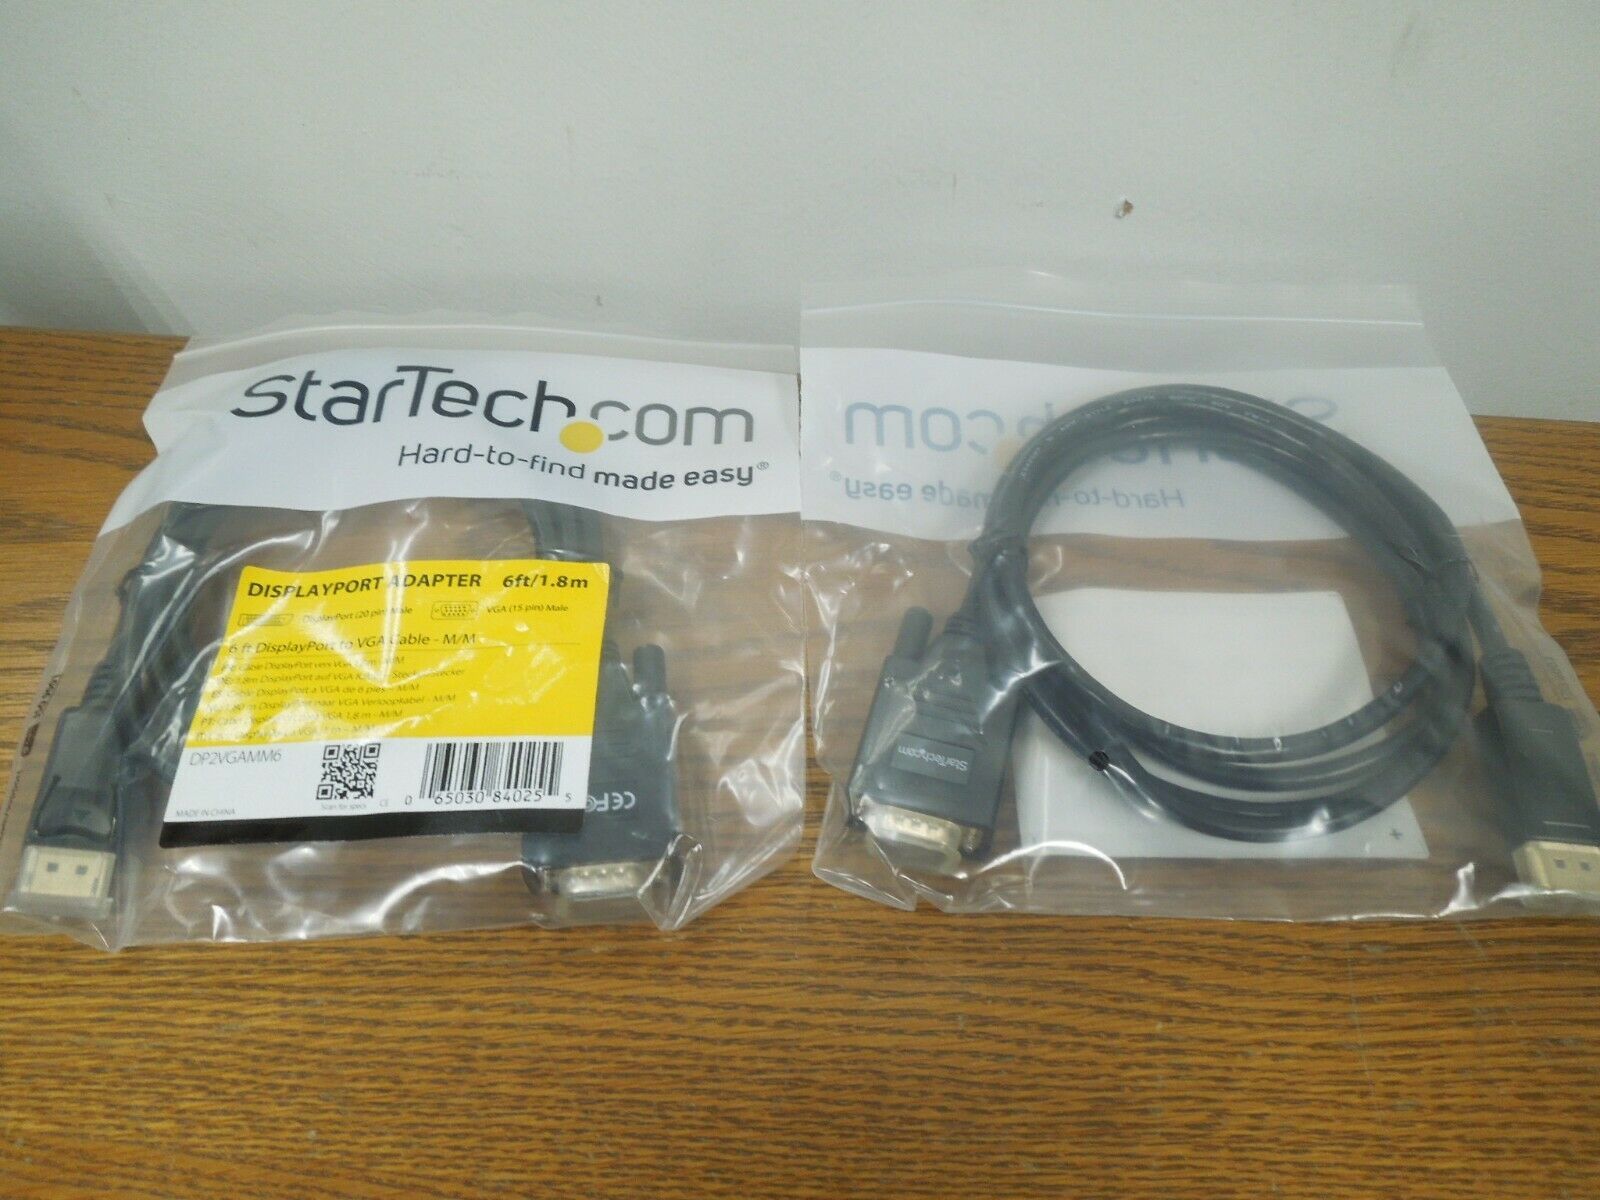 Primary image for StarTech.com DP2VGAMM6 6' Displayport to VGA Cable - M/M Adapter New - Set of 2